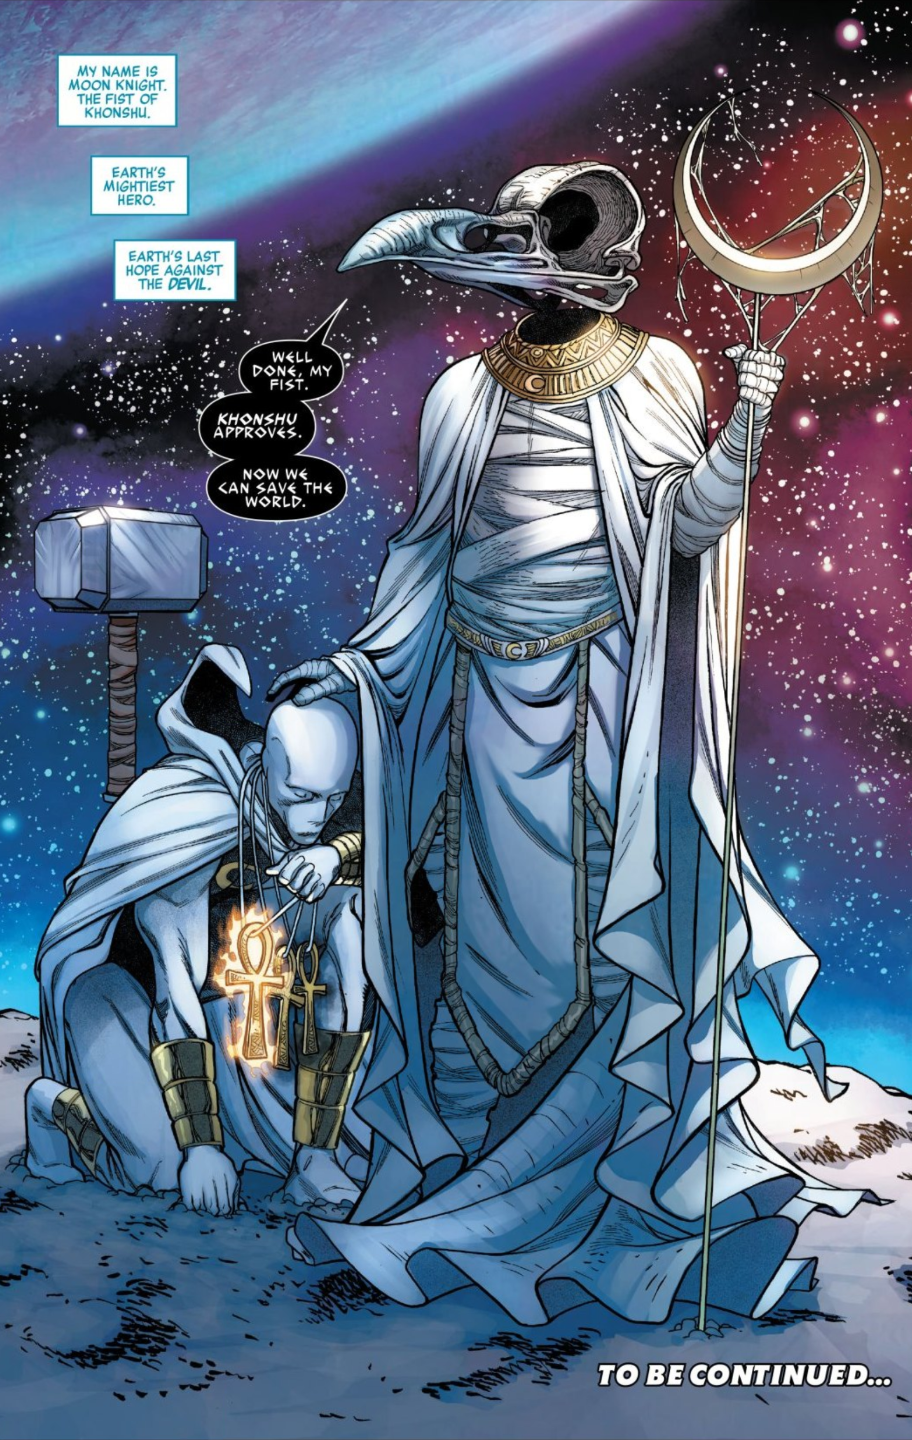 How Moon Knight Can Take Down the Avengers. Moon knight comics, Marvel moon knight, Moon knight